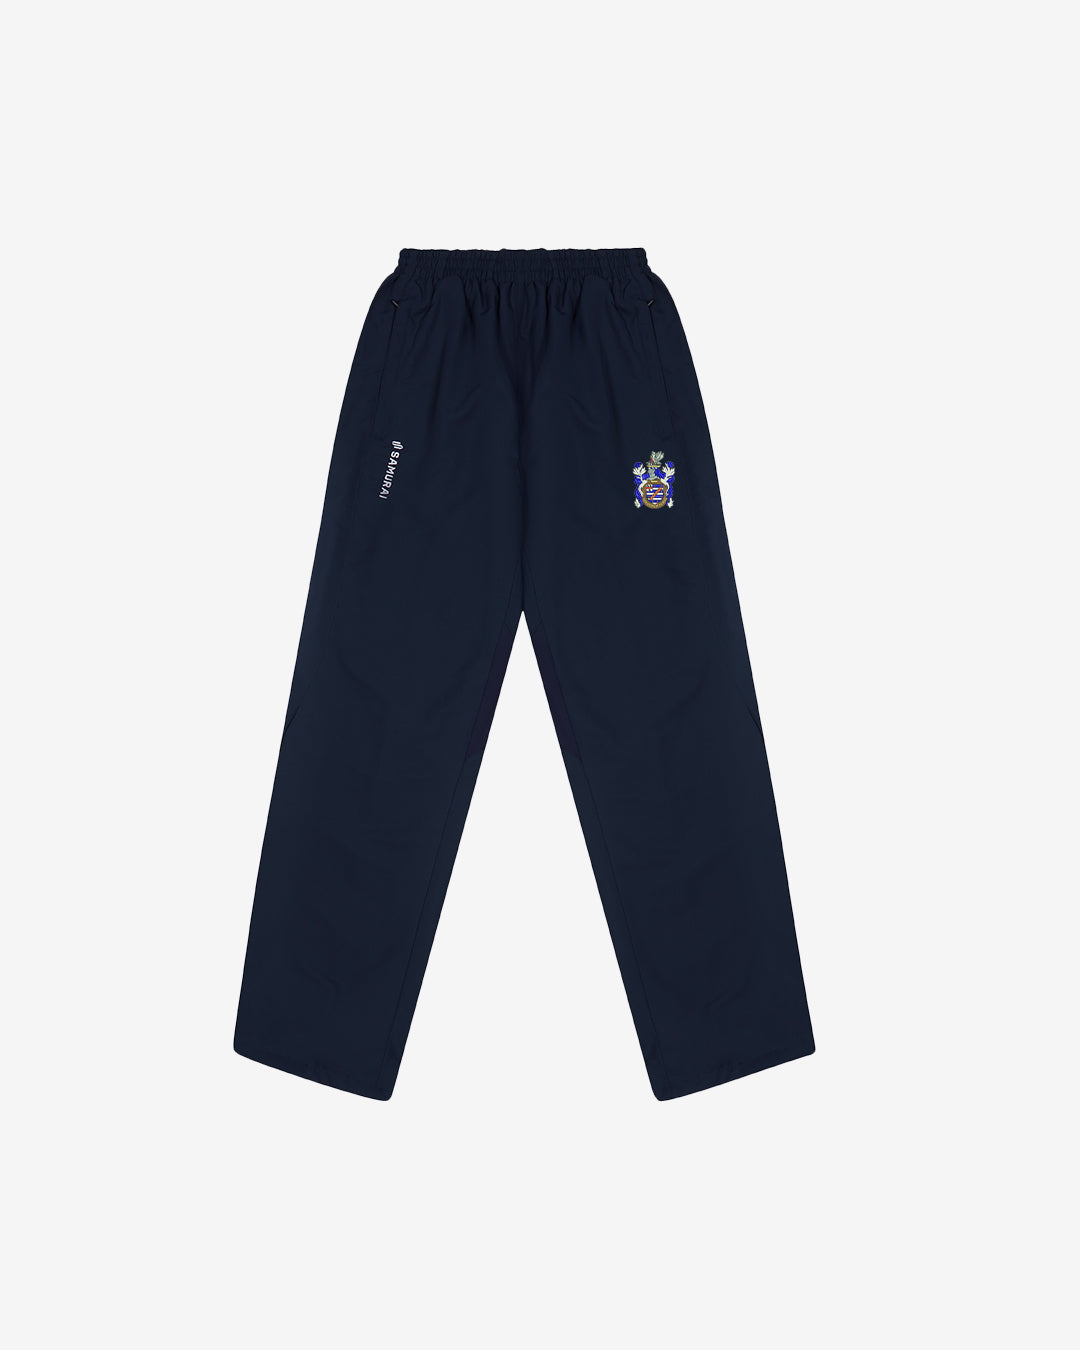 Skegness Rugby Club - EP:0127 - Active Pant - Navy